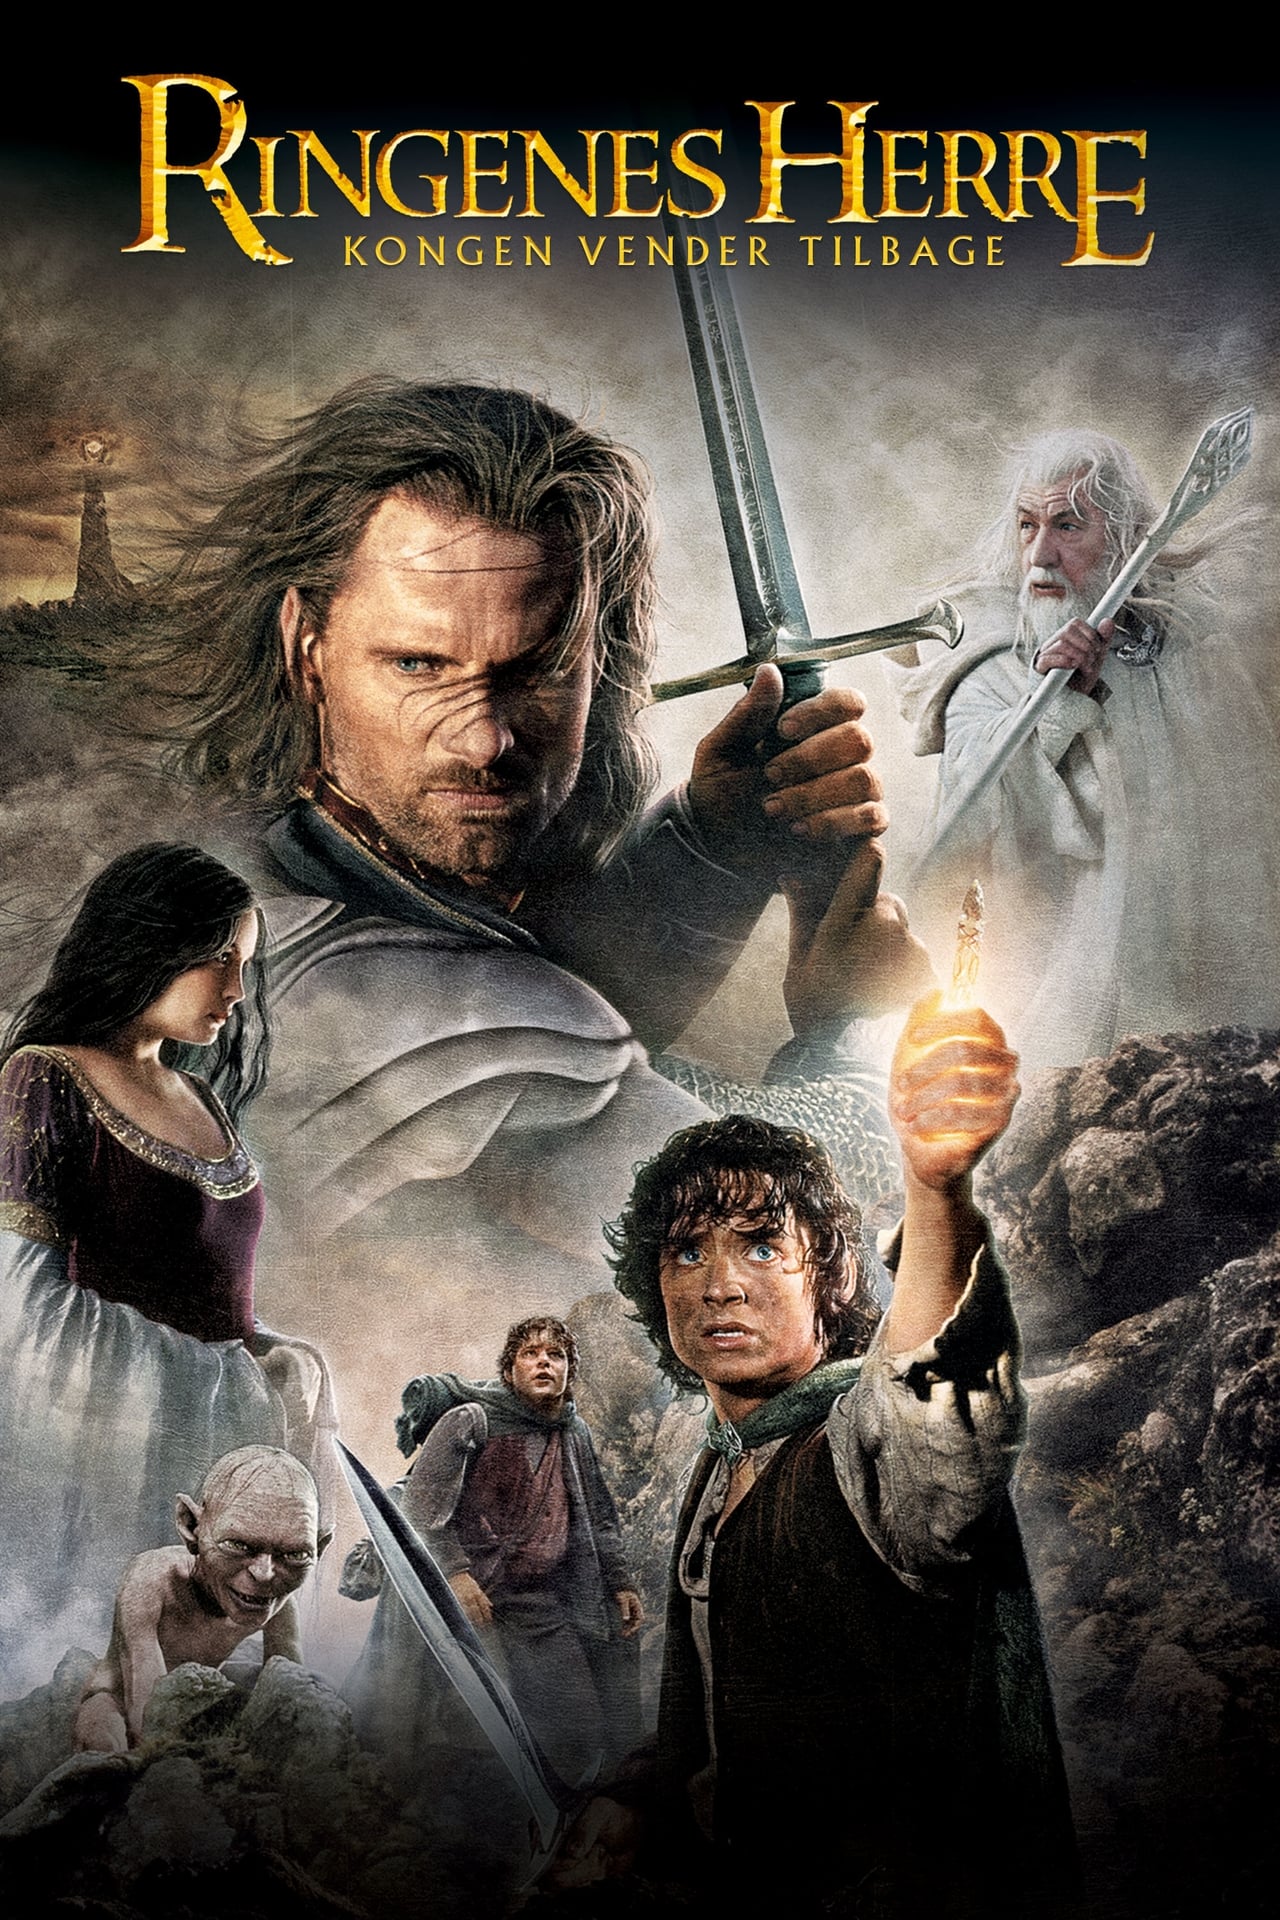 The Lord of the Rings: The Return of the King (Extended Edition) Movie - The Return Of The King Extended Edition Runtime